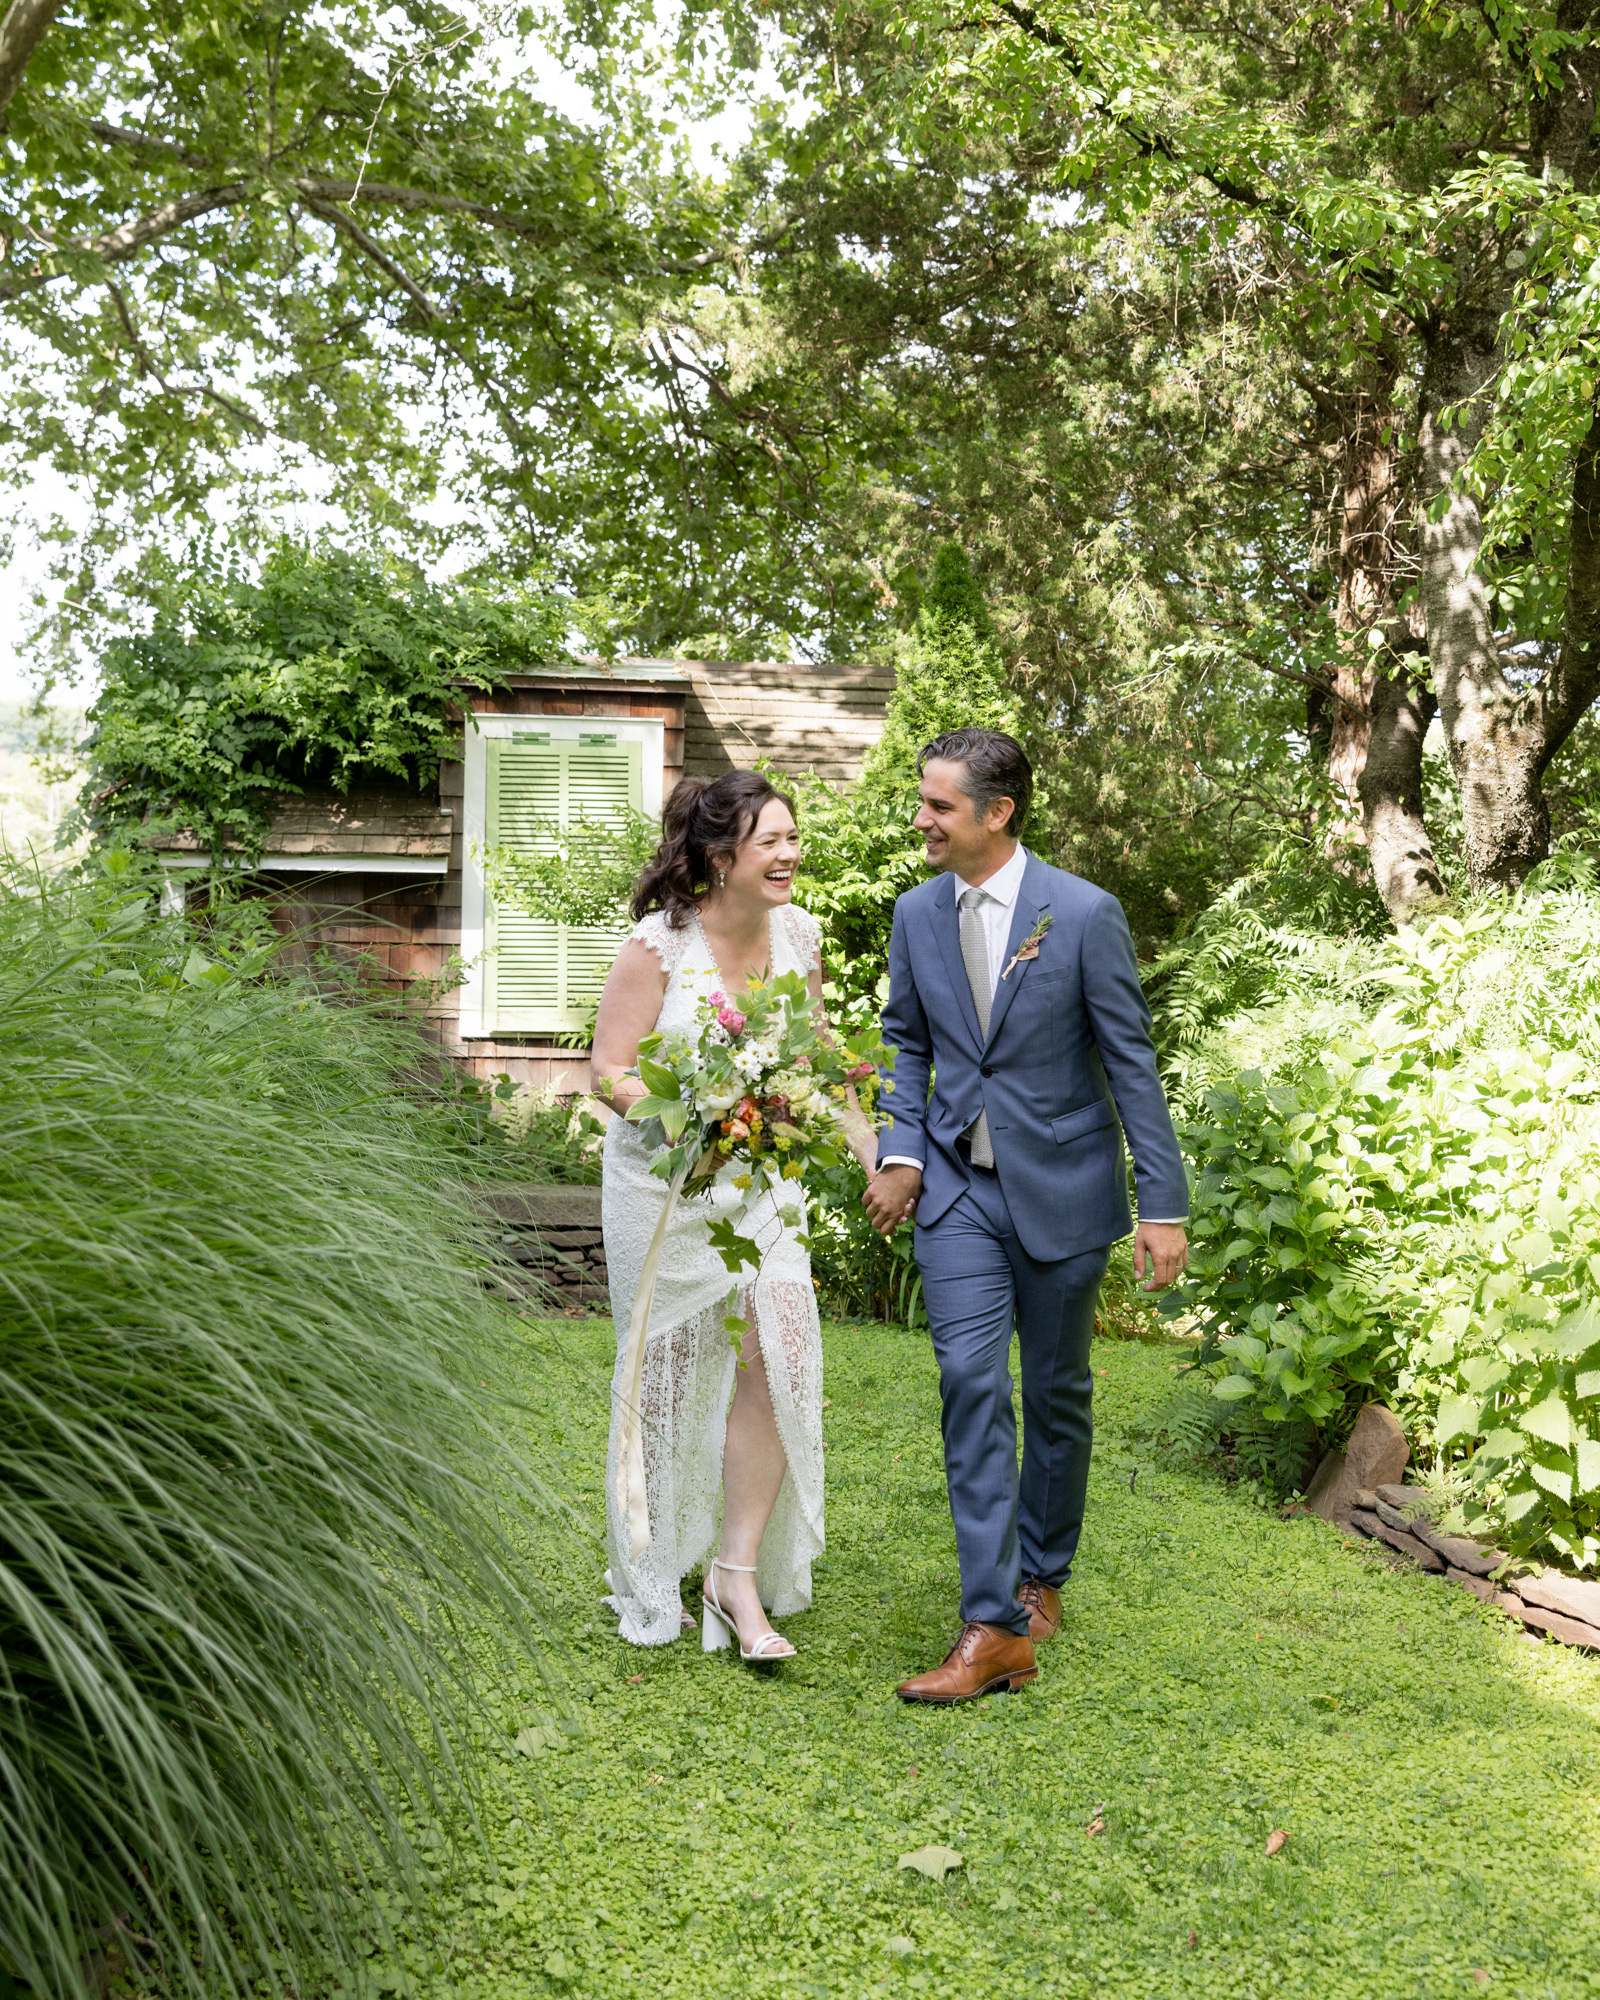 Joyful couple moments after their wedding ceremony at Bridgeton House on the Delaware in Bucks County, PA